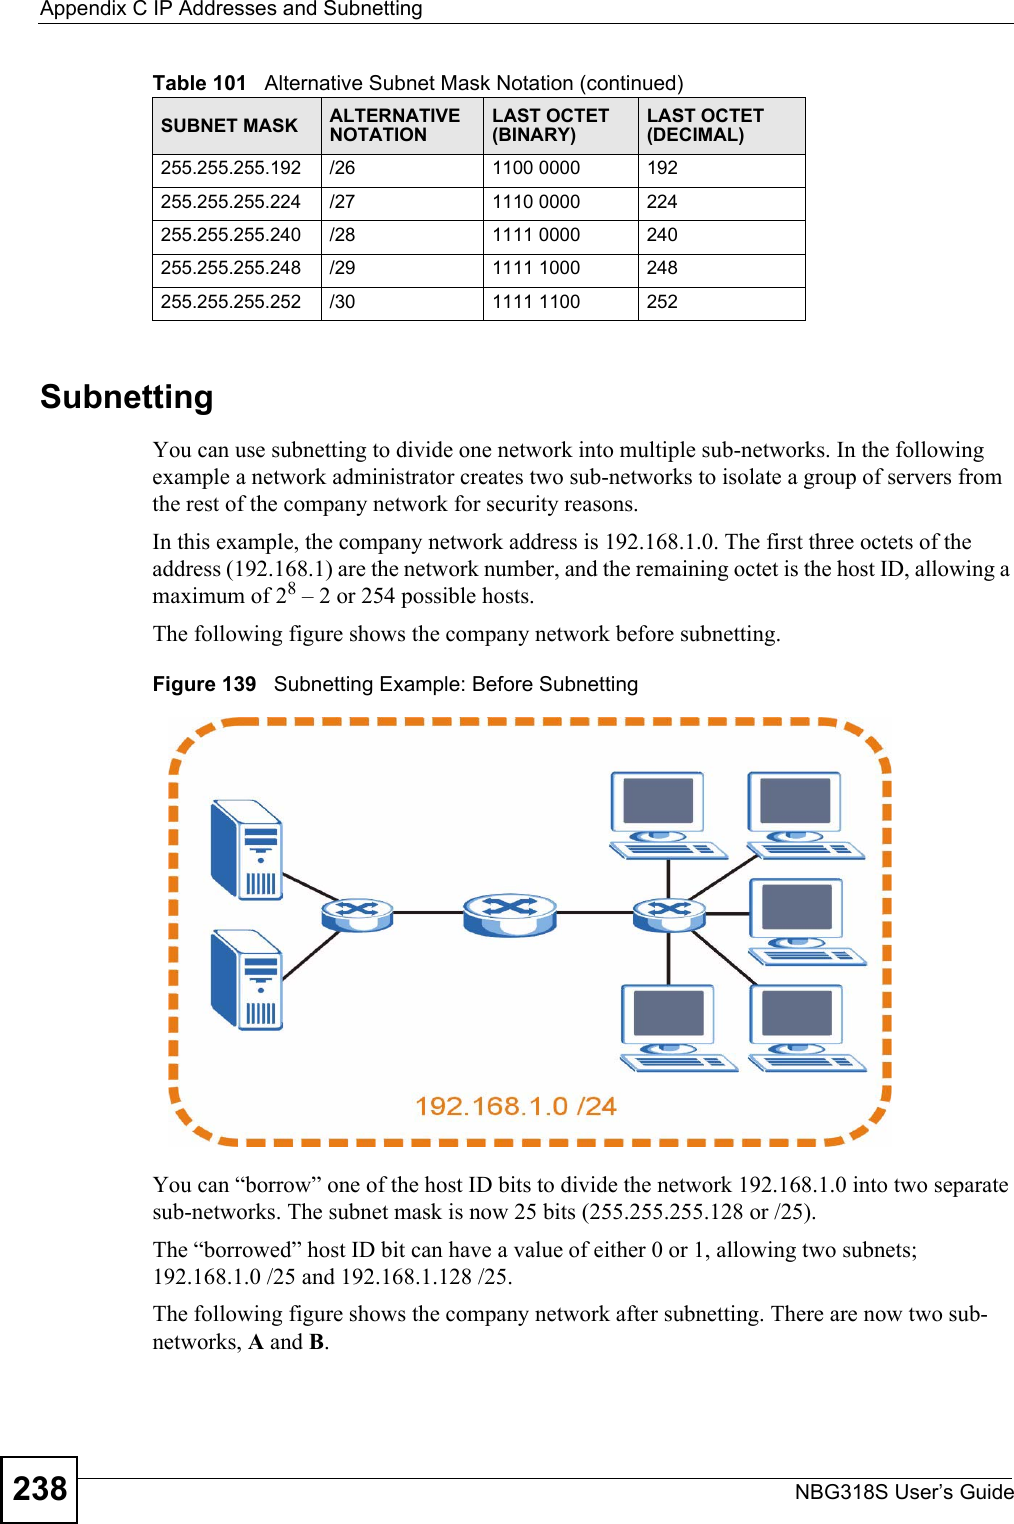 Appendix C IP Addresses and SubnettingNBG318S User’s Guide238SubnettingYou can use subnetting to divide one network into multiple sub-networks. In the following example a network administrator creates two sub-networks to isolate a group of servers from the rest of the company network for security reasons.In this example, the company network address is 192.168.1.0. The first three octets of the address (192.168.1) are the network number, and the remaining octet is the host ID, allowing a maximum of 28 – 2 or 254 possible hosts.The following figure shows the company network before subnetting.  Figure 139   Subnetting Example: Before SubnettingYou can “borrow” one of the host ID bits to divide the network 192.168.1.0 into two separate sub-networks. The subnet mask is now 25 bits (255.255.255.128 or /25).The “borrowed” host ID bit can have a value of either 0 or 1, allowing two subnets; 192.168.1.0 /25 and 192.168.1.128 /25. The following figure shows the company network after subnetting. There are now two sub-networks, A and B. 255.255.255.192 /26 1100 0000 192255.255.255.224 /27 1110 0000 224255.255.255.240 /28 1111 0000 240255.255.255.248 /29 1111 1000 248255.255.255.252 /30 1111 1100 252Table 101   Alternative Subnet Mask Notation (continued)SUBNET MASK ALTERNATIVE NOTATIONLAST OCTET (BINARY)LAST OCTET (DECIMAL)